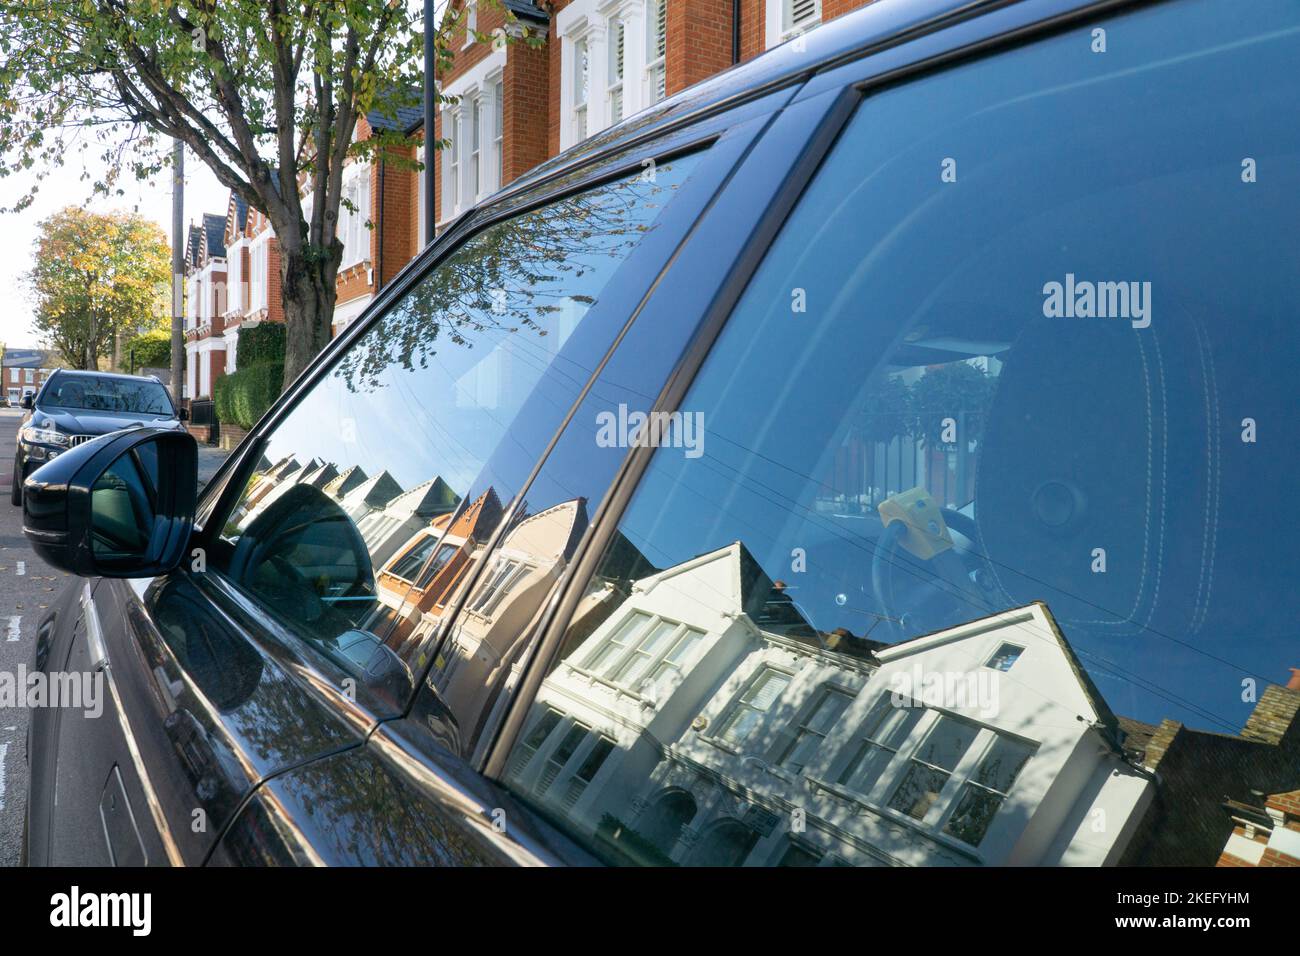 London, UK, 12 November 2022: On Hambalt Road in the Abbeville village area of Clapham a row of terraced houses in bright sunshine is reflected in the window of an SUV car. Clapham house prices are high and many luxury cars are parked on the streets. Anna Watson/Alamy Live News Stock Photo